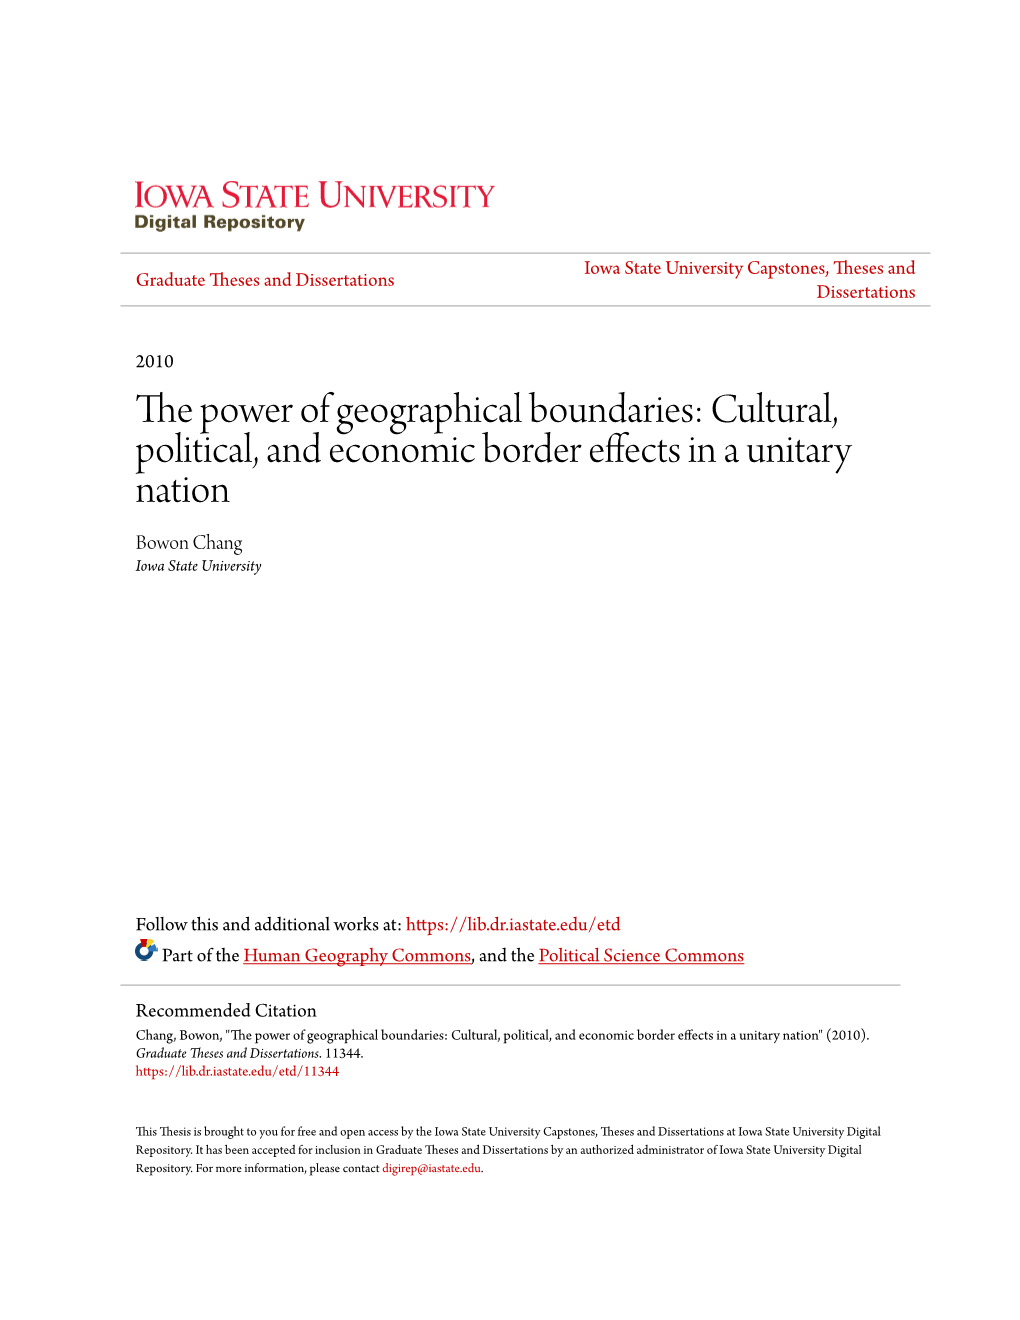 Cultural, Political, and Economic Border Effects in a Unitary Nation Bowon Chang Iowa State University